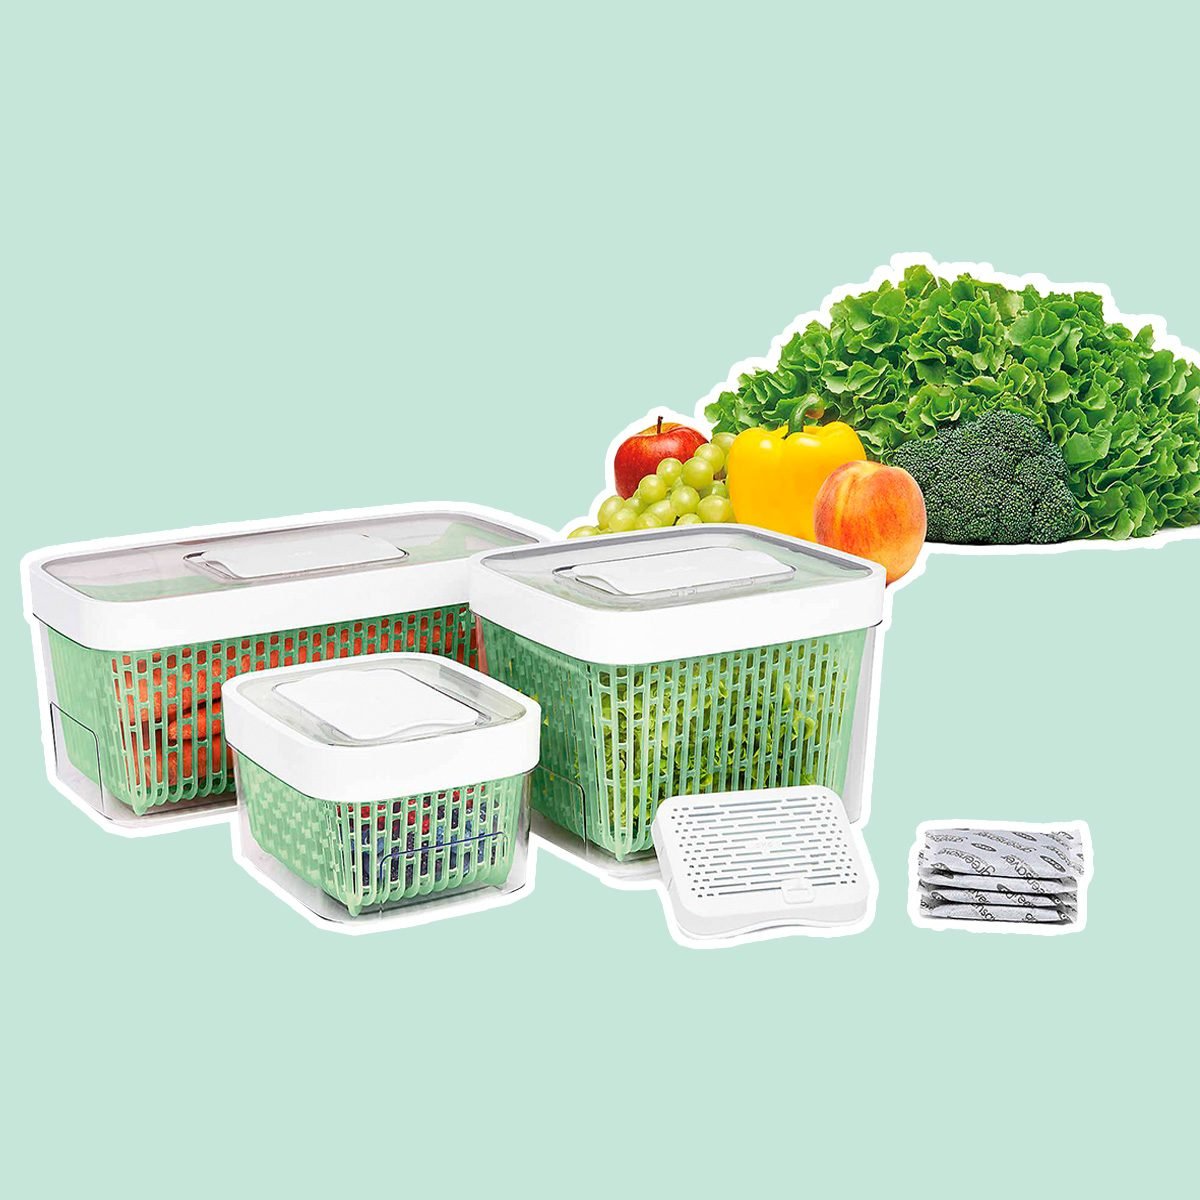 OXO Good Grips® Green Saver™ Produce Keeper